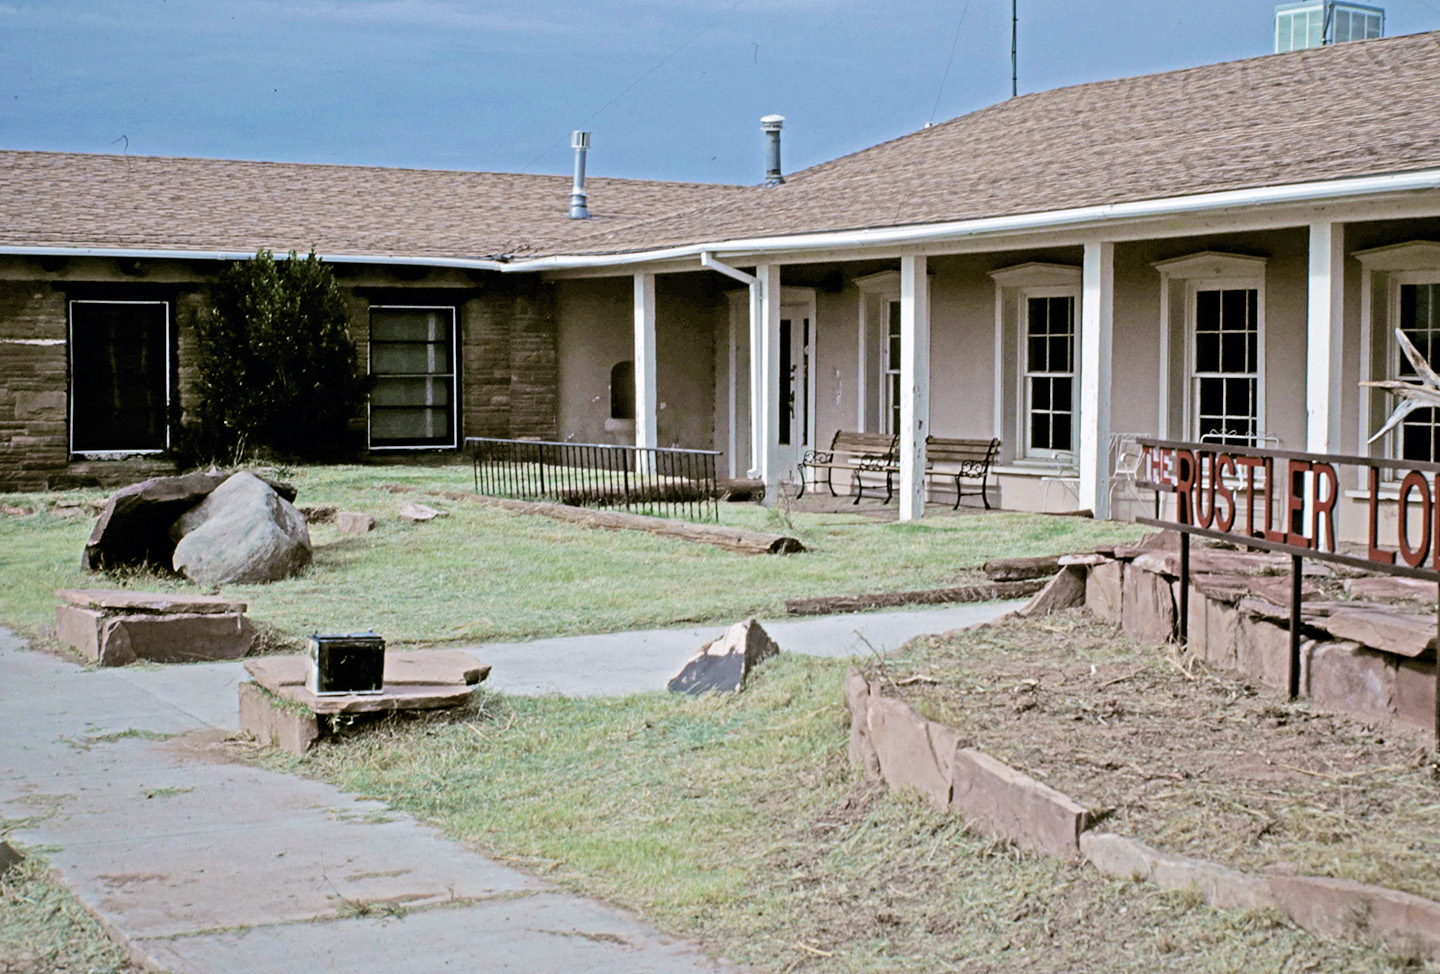 Image of the front of the Conchas Lodge, circa 1950s/60s.